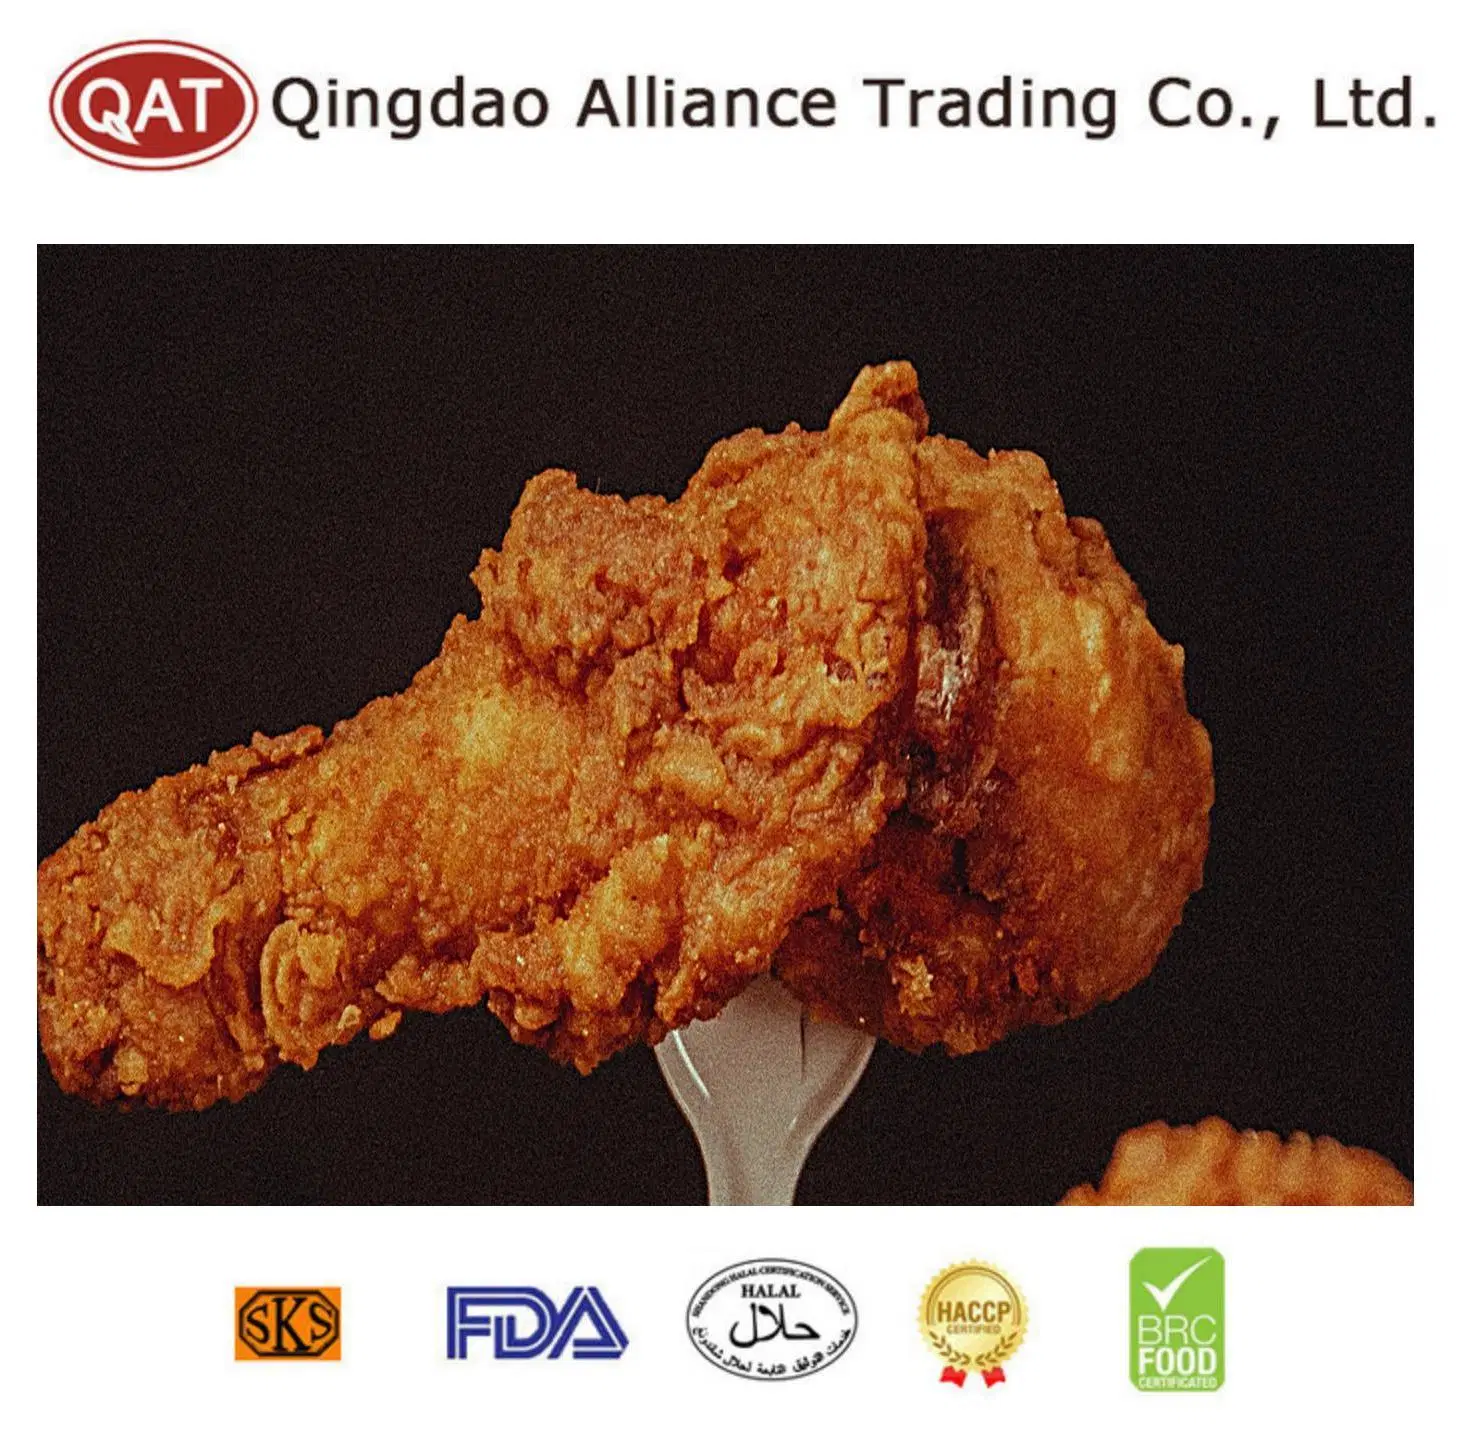 Top Quality IQF Halal Frozen Boneless Chicken Fin with Certificate